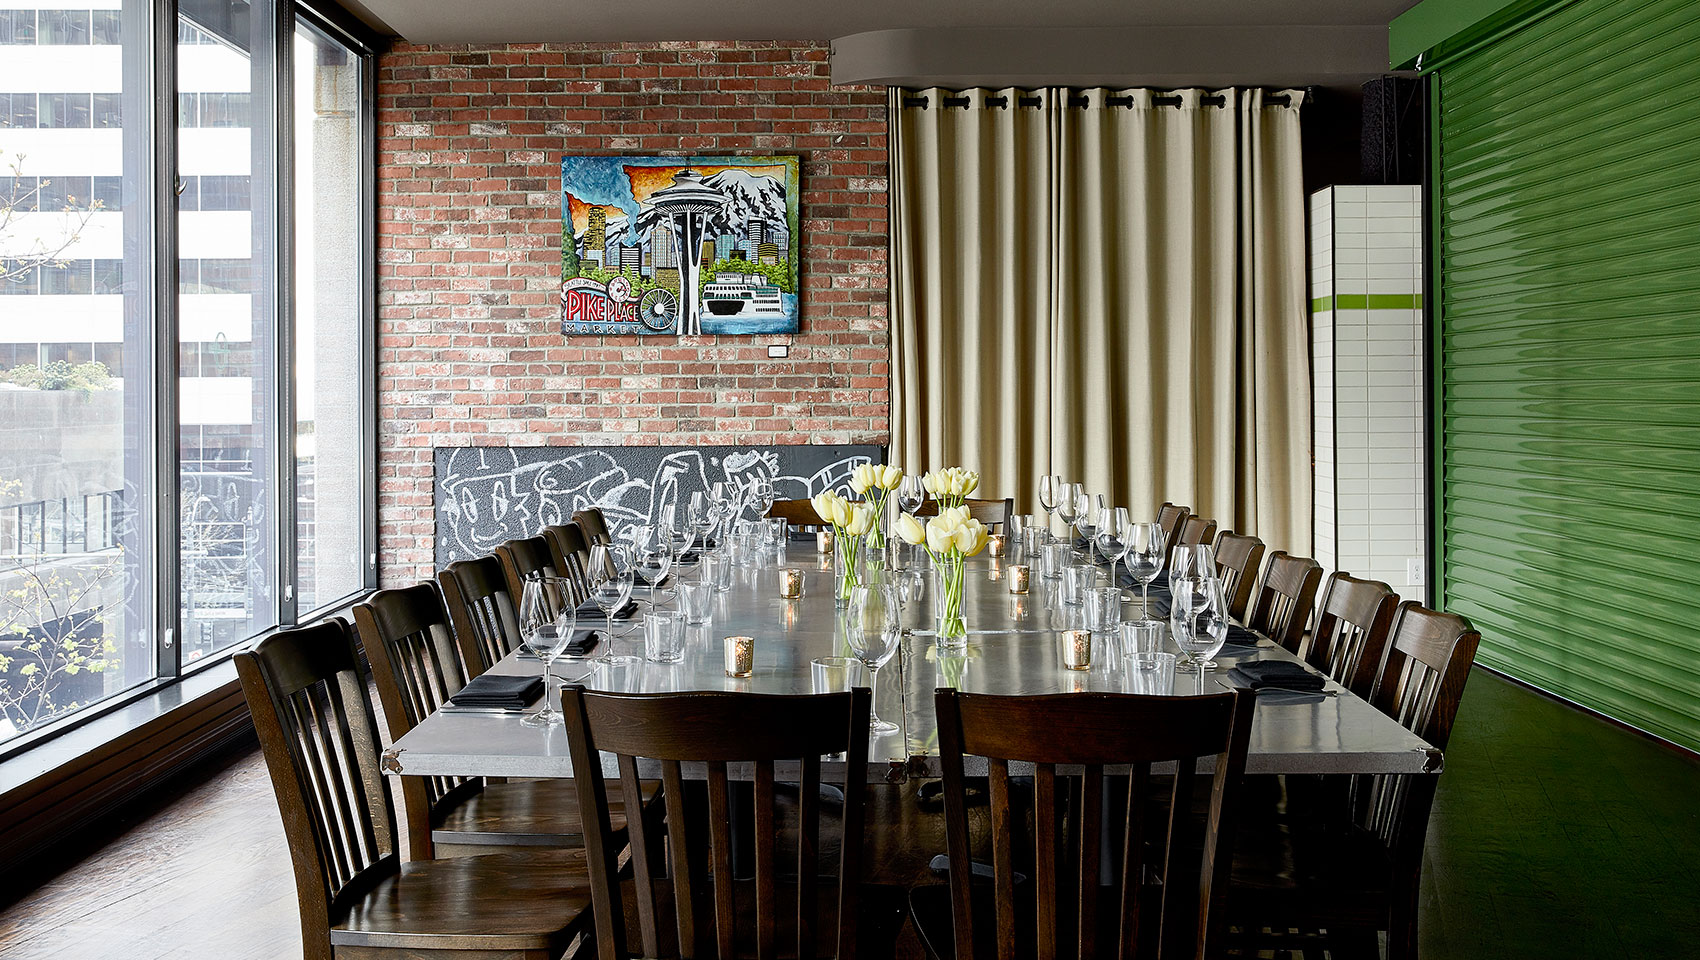 Garage style private dining space overlooking downtown Seattle